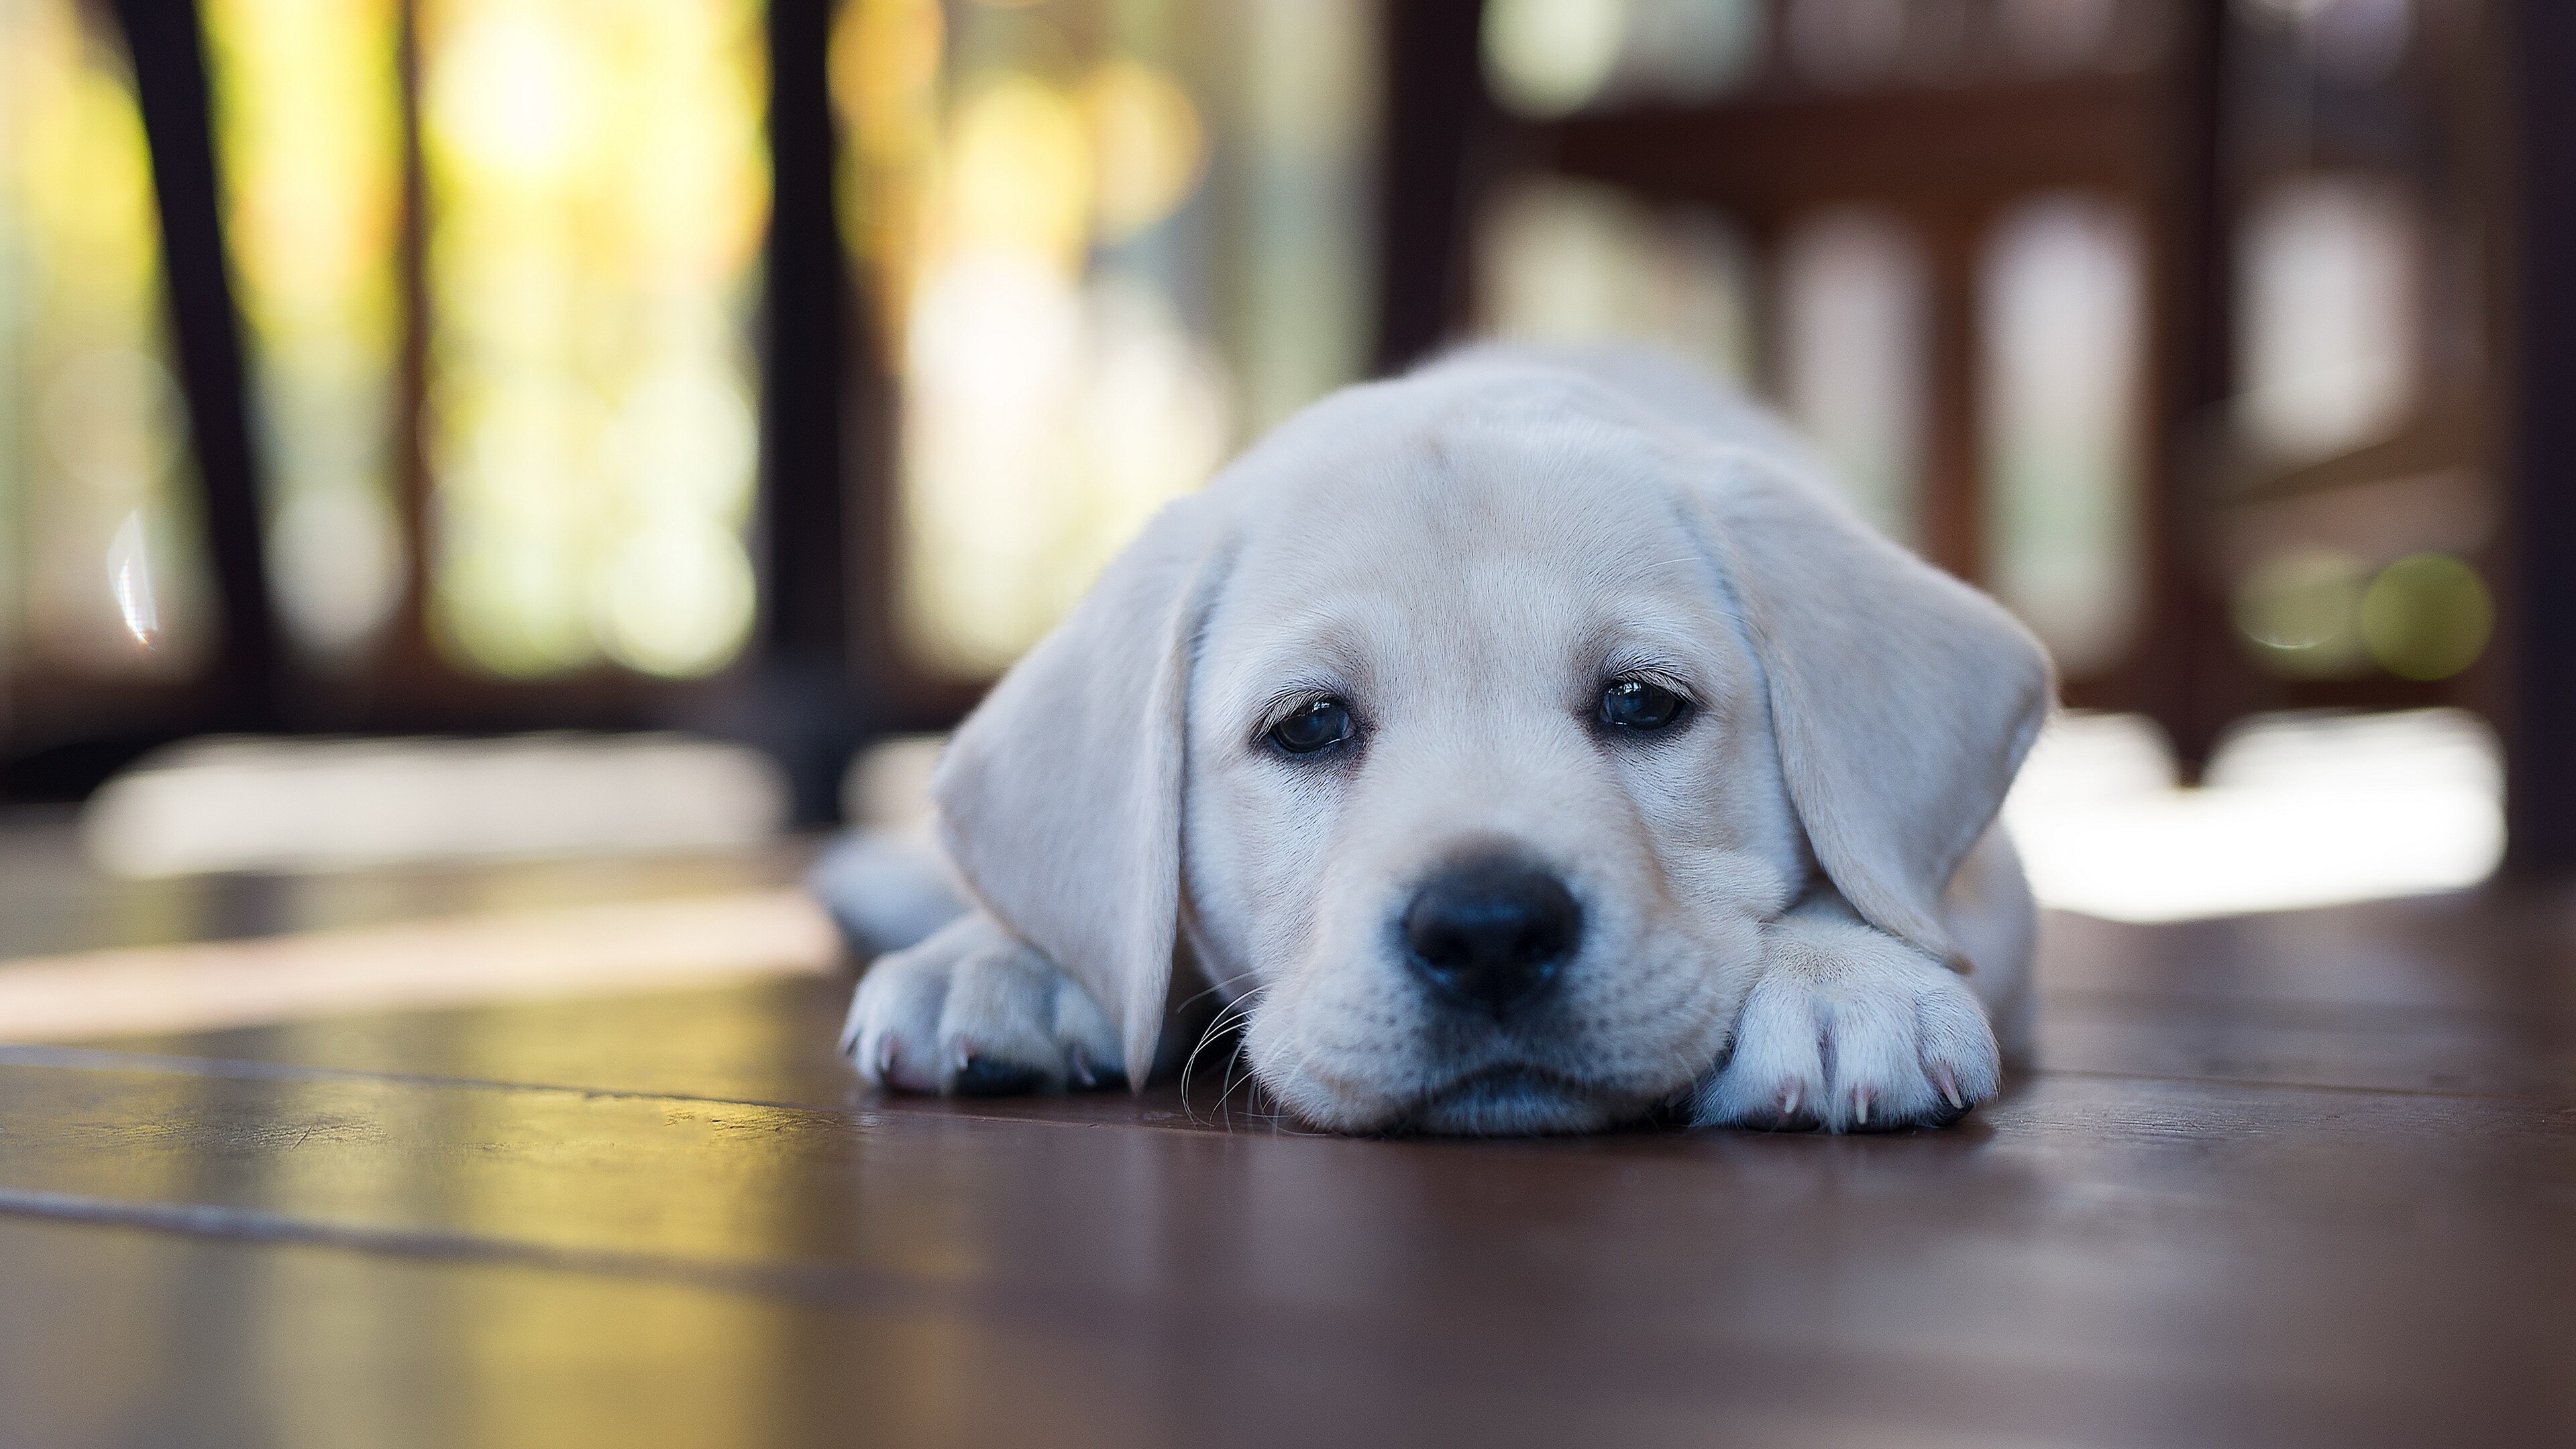 Labrador: It was developed in the United Kingdom from fishing dogs imported from the colony of Newfoundland and was named after the region of that colony, Pet. 3840x2160 4K Wallpaper.